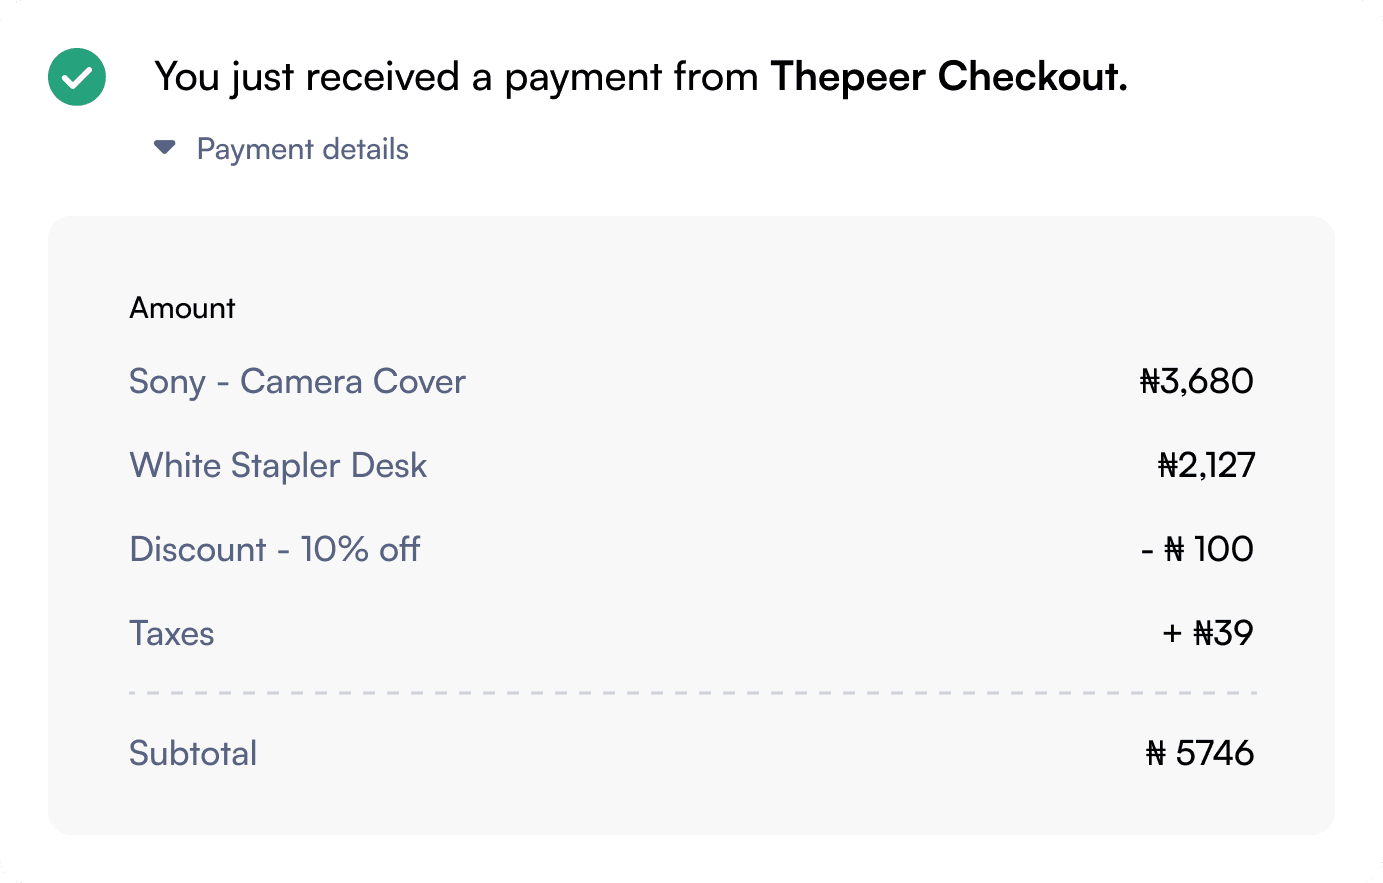 An image of Thepeer payment checkout showing payment details, showing amount and items purchased.